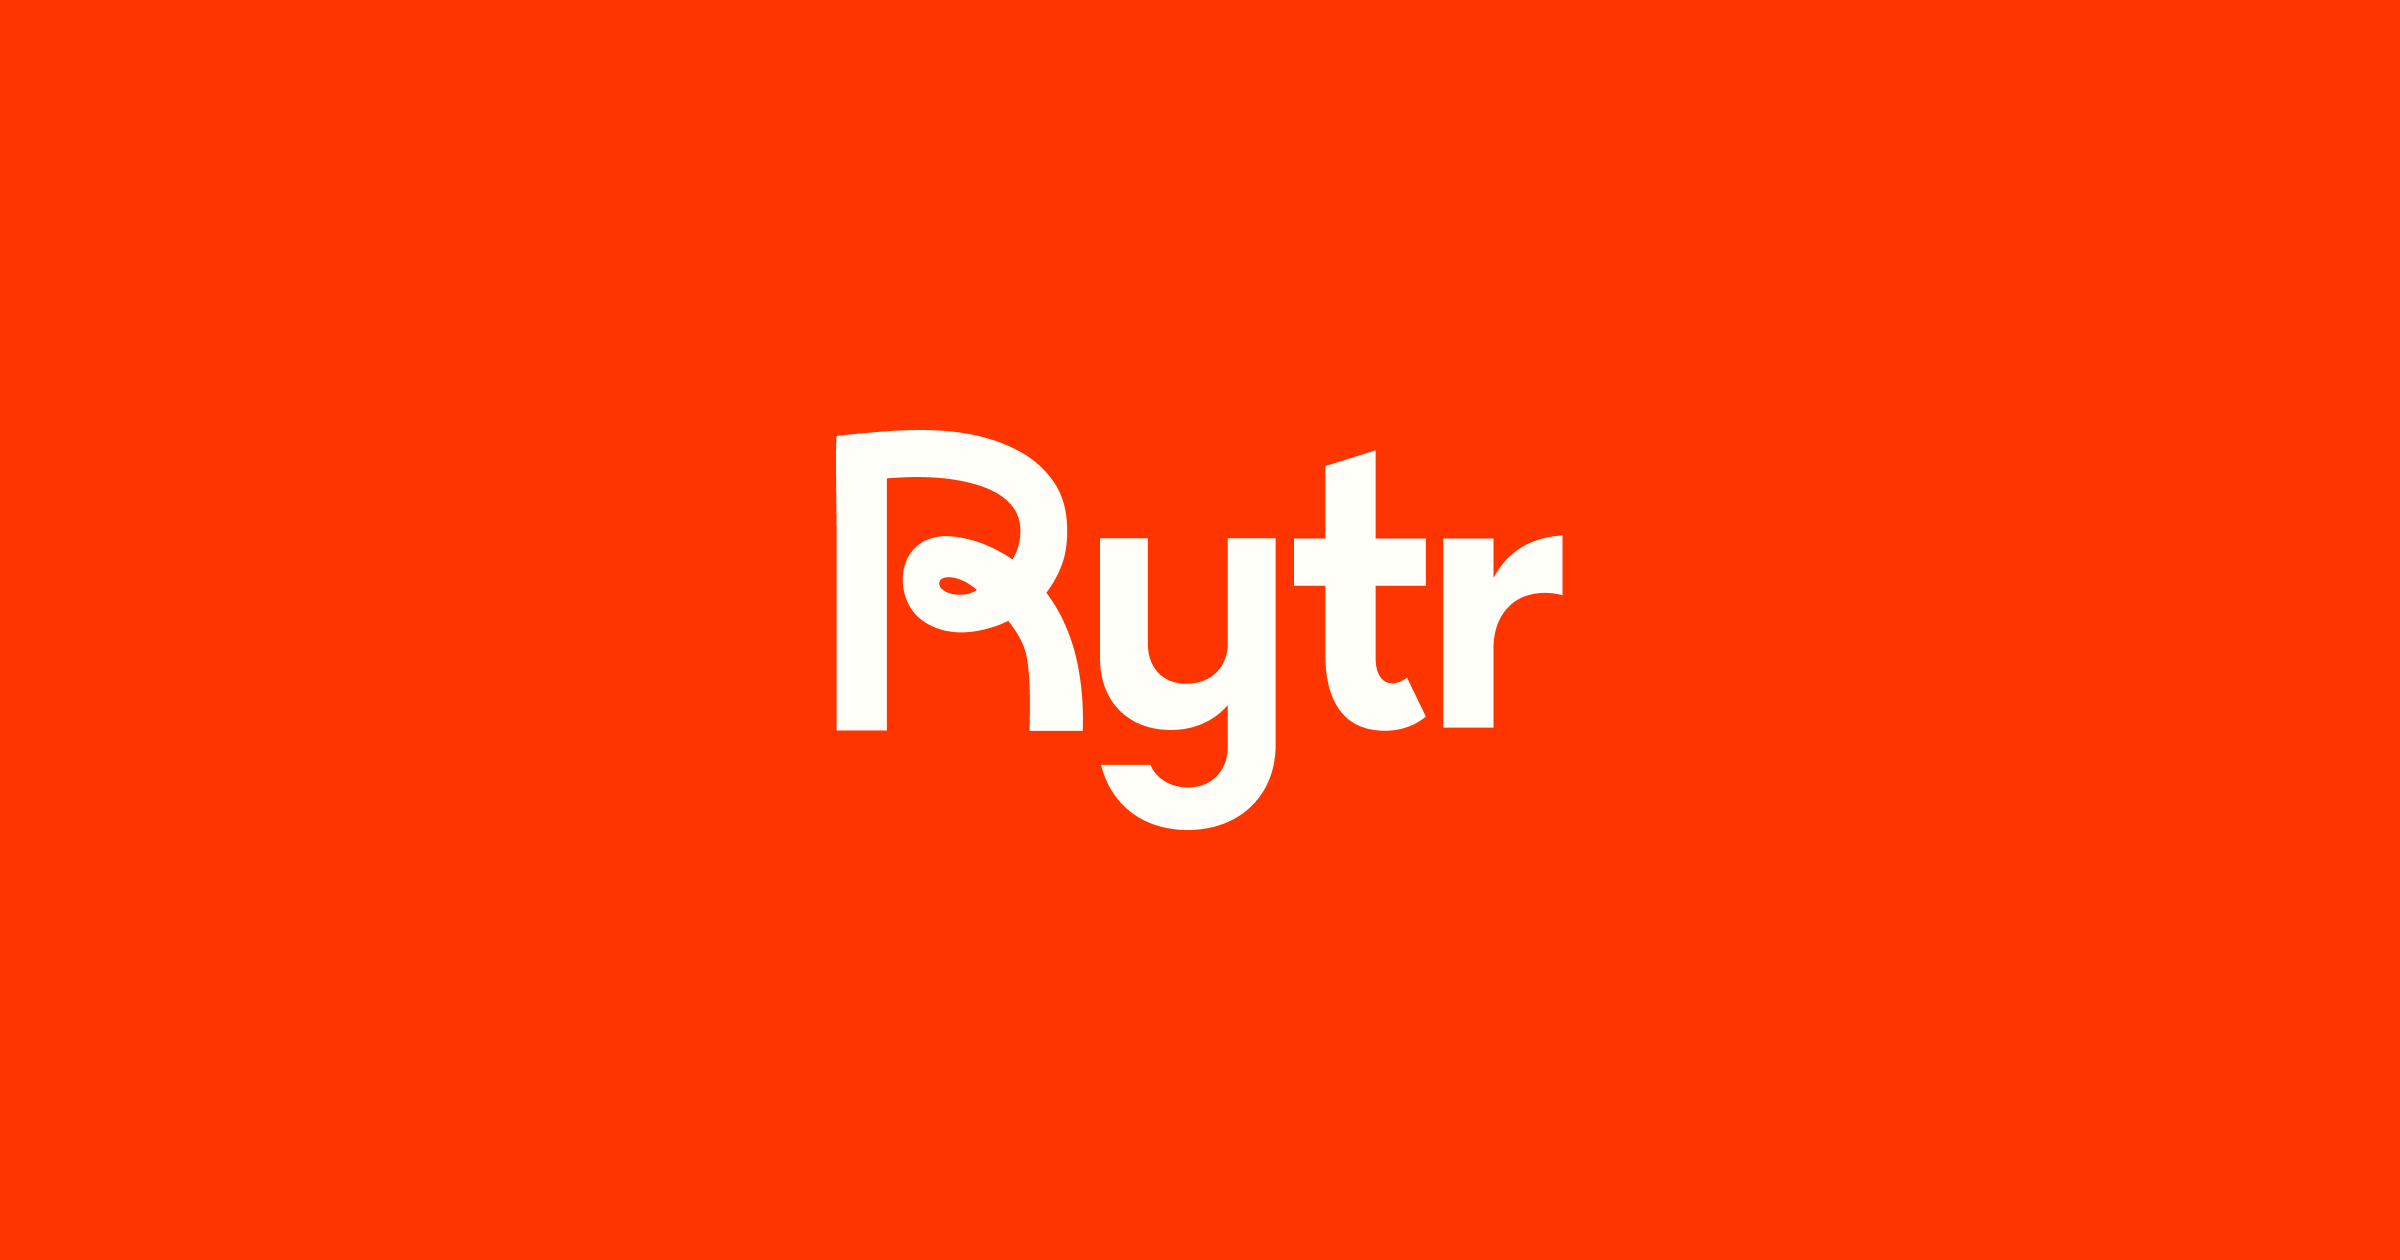 Cover Image for Rytr